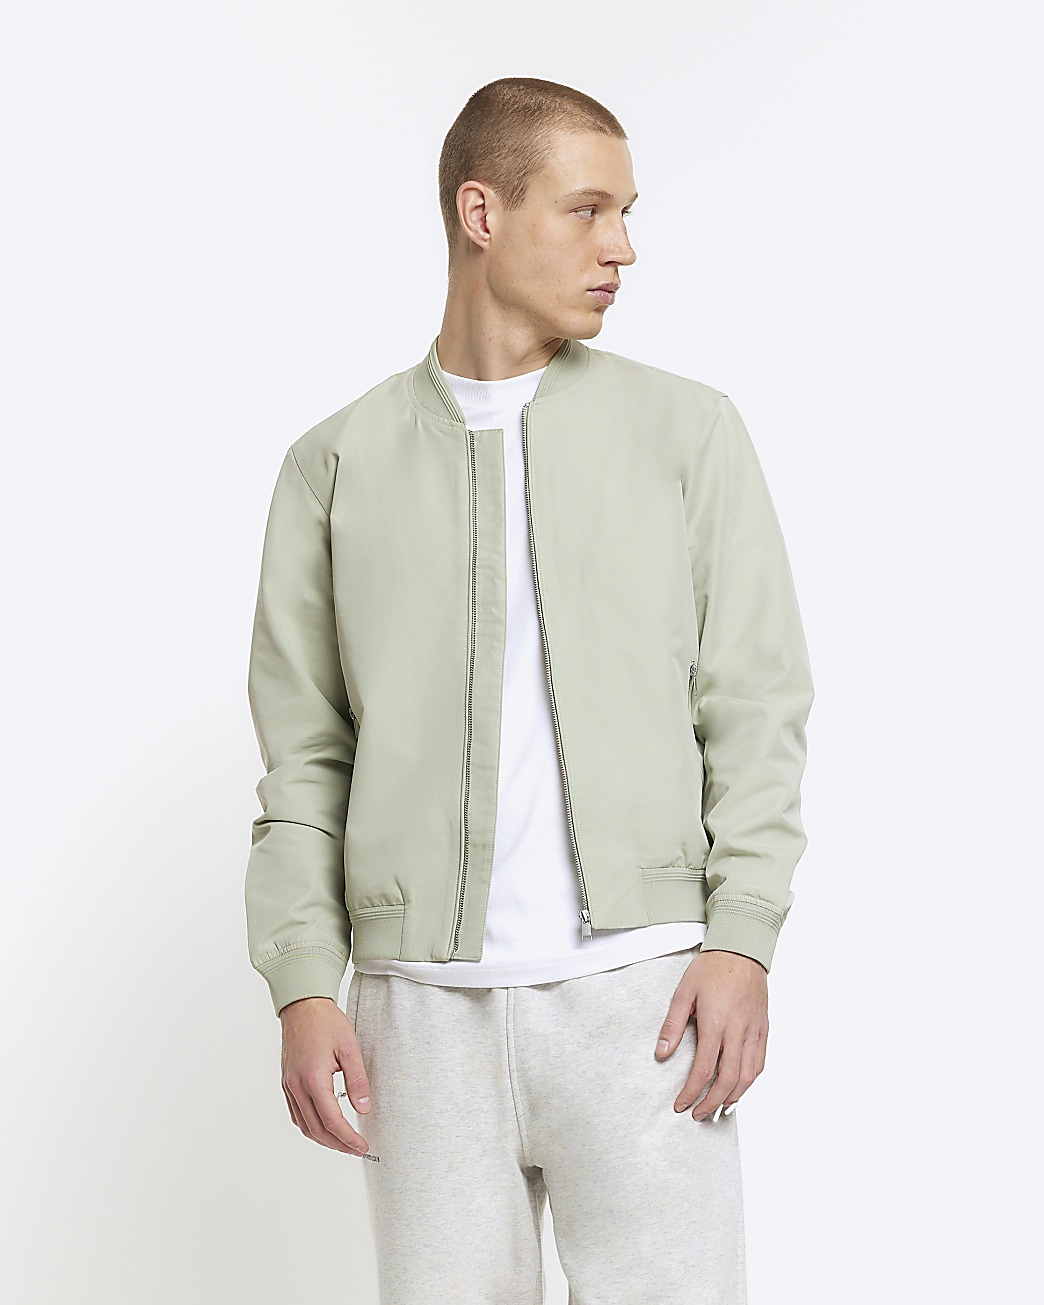 Visual filter display for Bomber Jackets